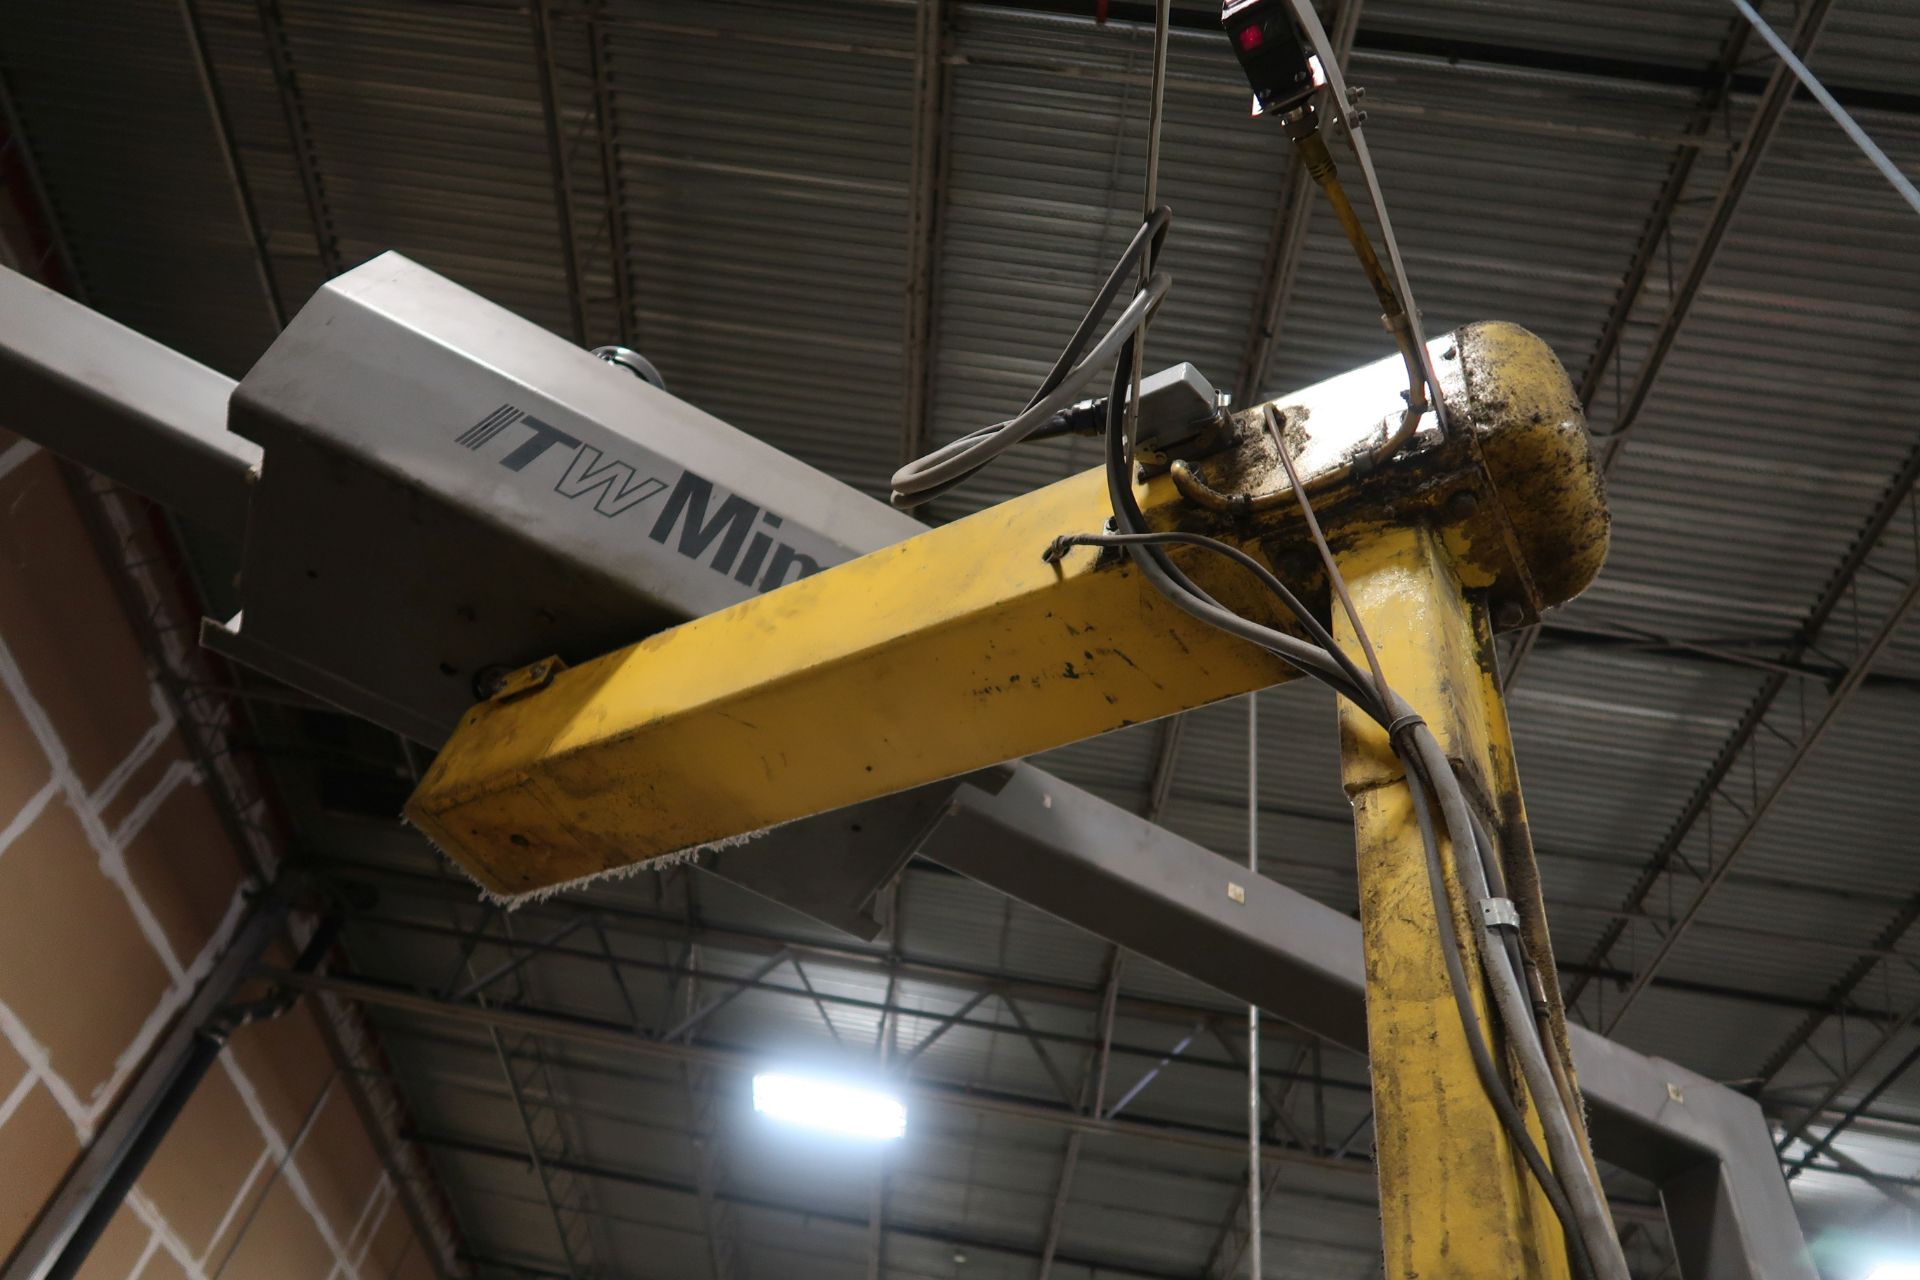 ITW MIMA MODEL KC500 SWING ARM TYPE PALLET STRETCH WRAP MACHINE; S/N 20026, 164" BETWEEN COLUMNS, - Image 9 of 13